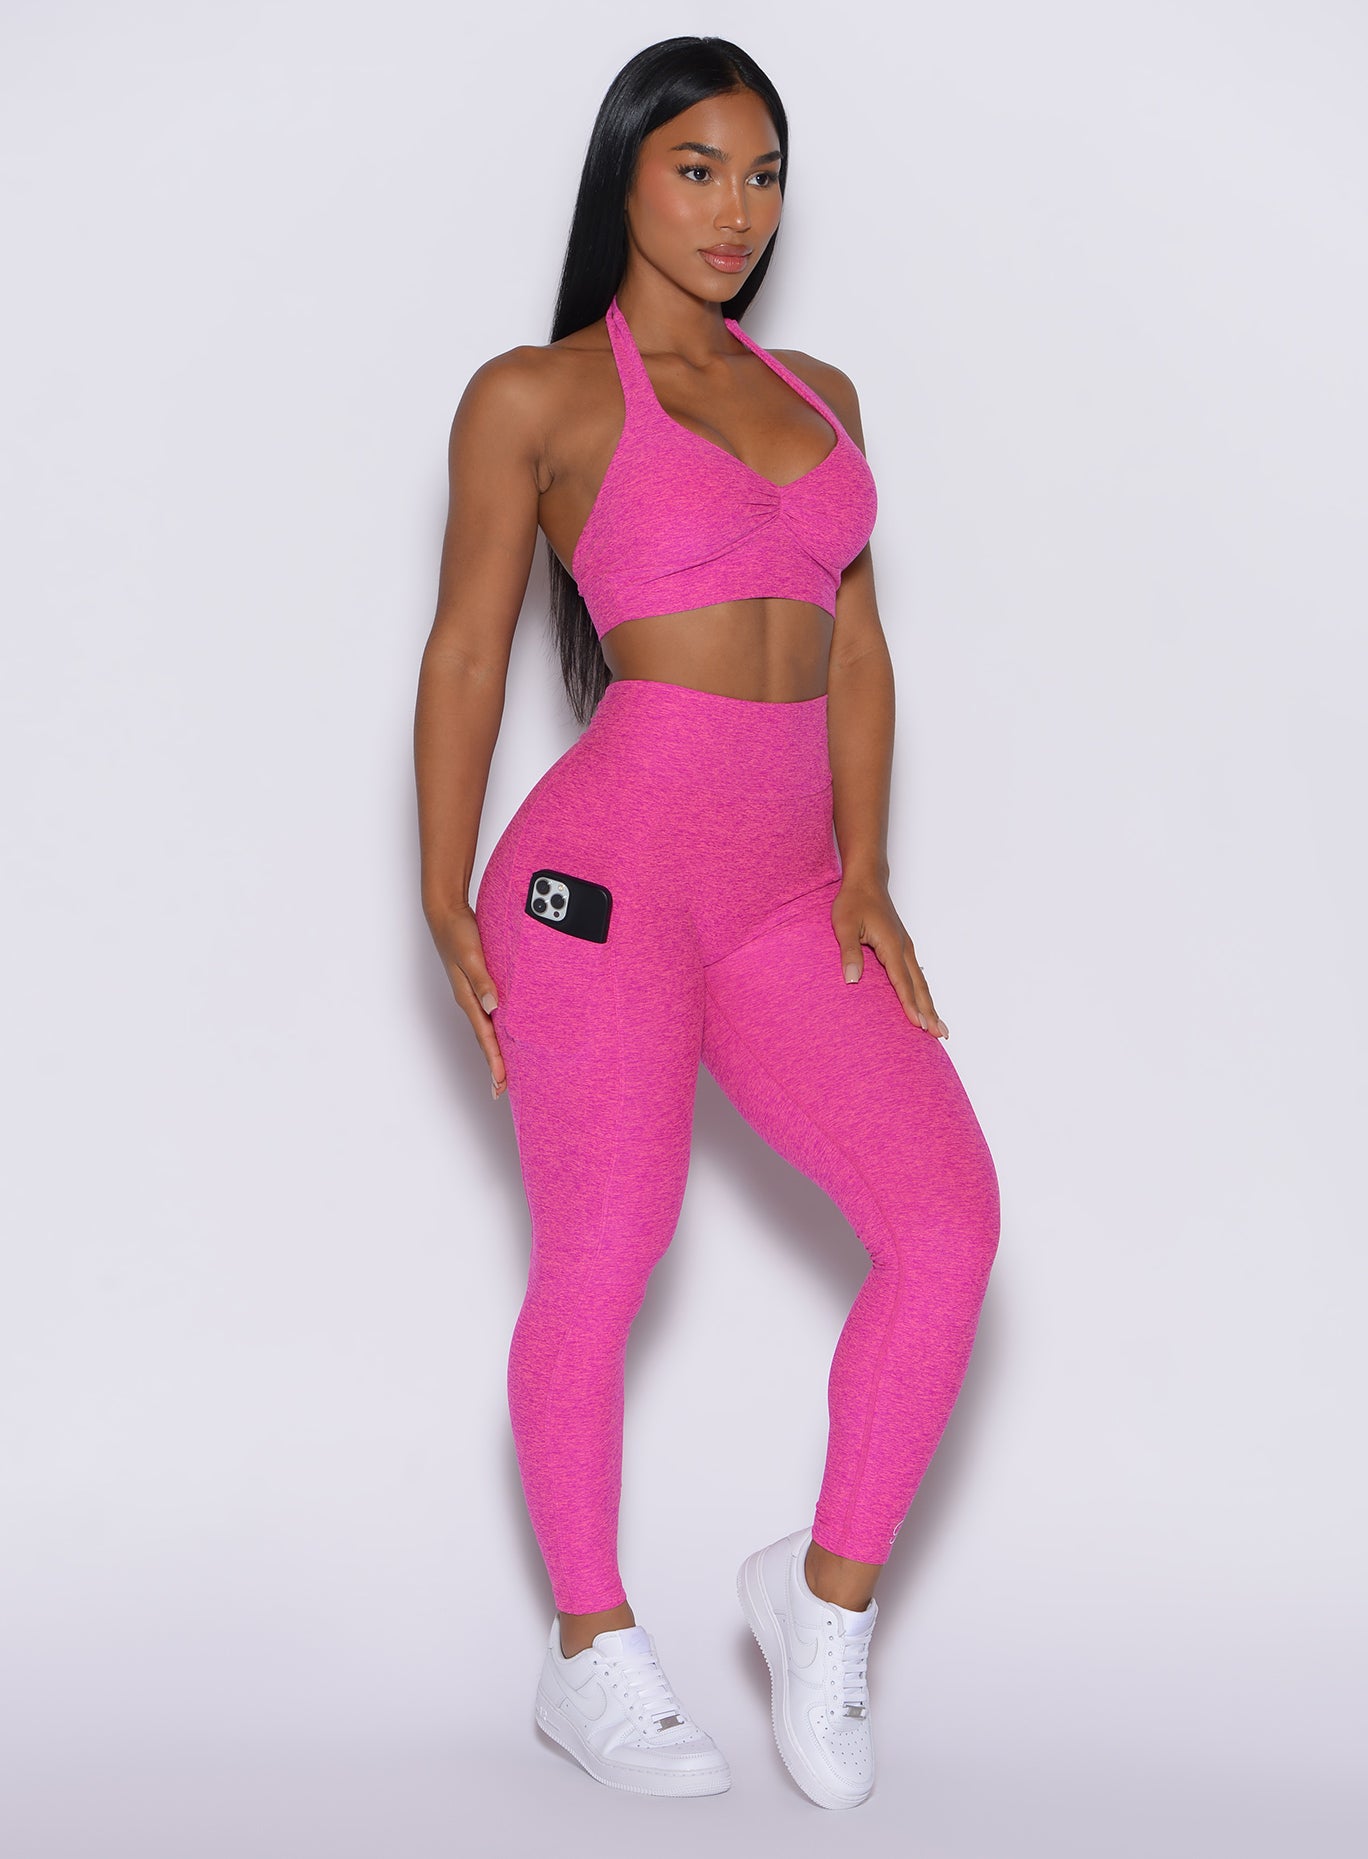 front profile view of a model wearing our V back leggings in Neon pink sorbet color along with a matching sports bra